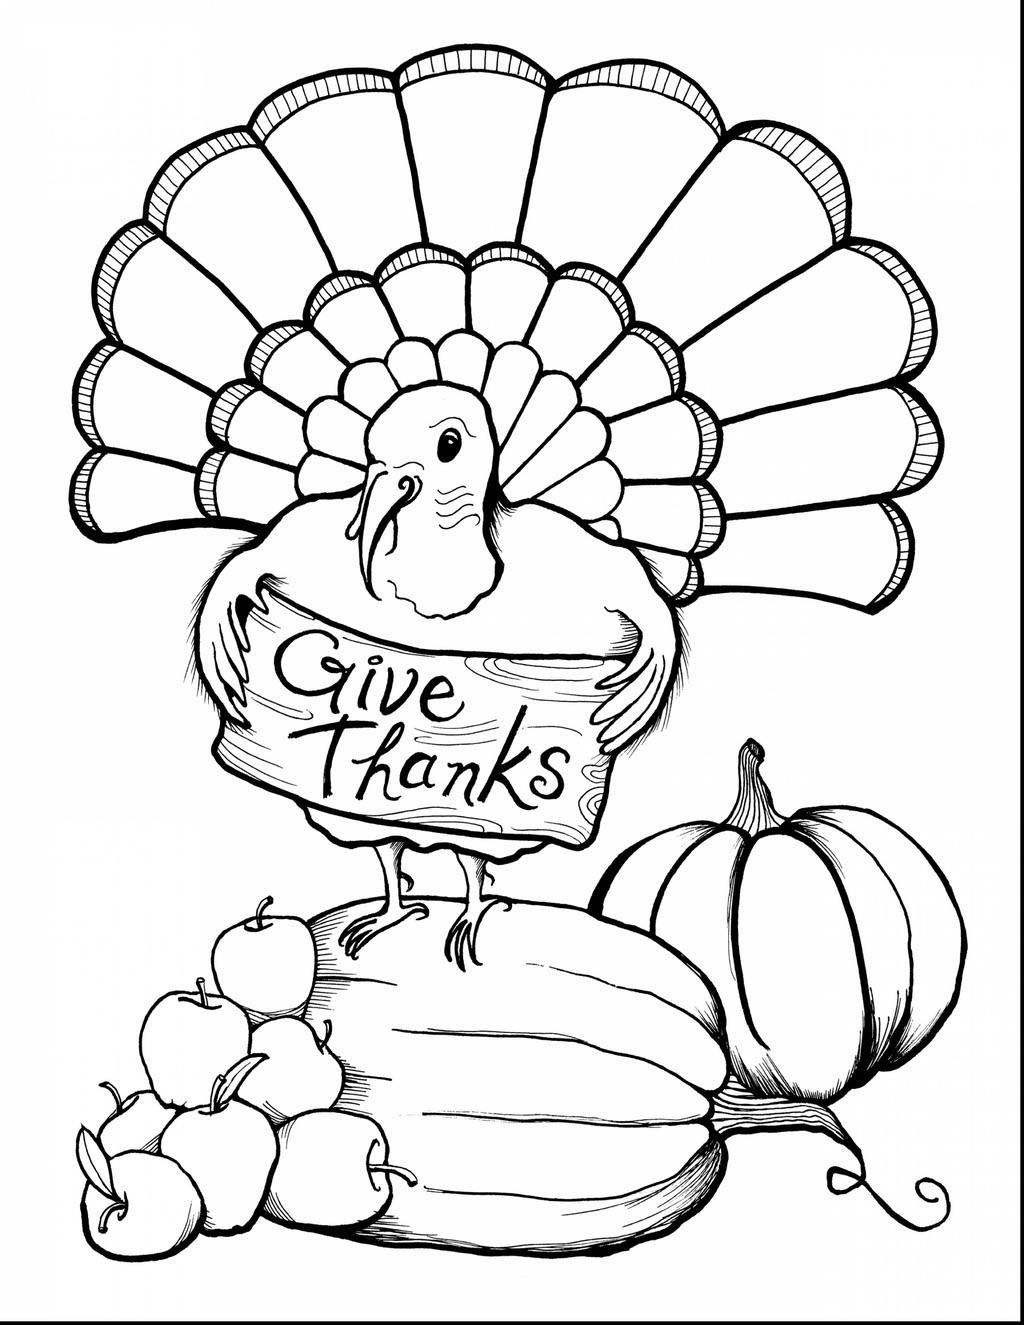 Happy Thanksgiving Coloring Pages For Boys
 Thanksgiving Coloring Pages ful Happy for Boys Free